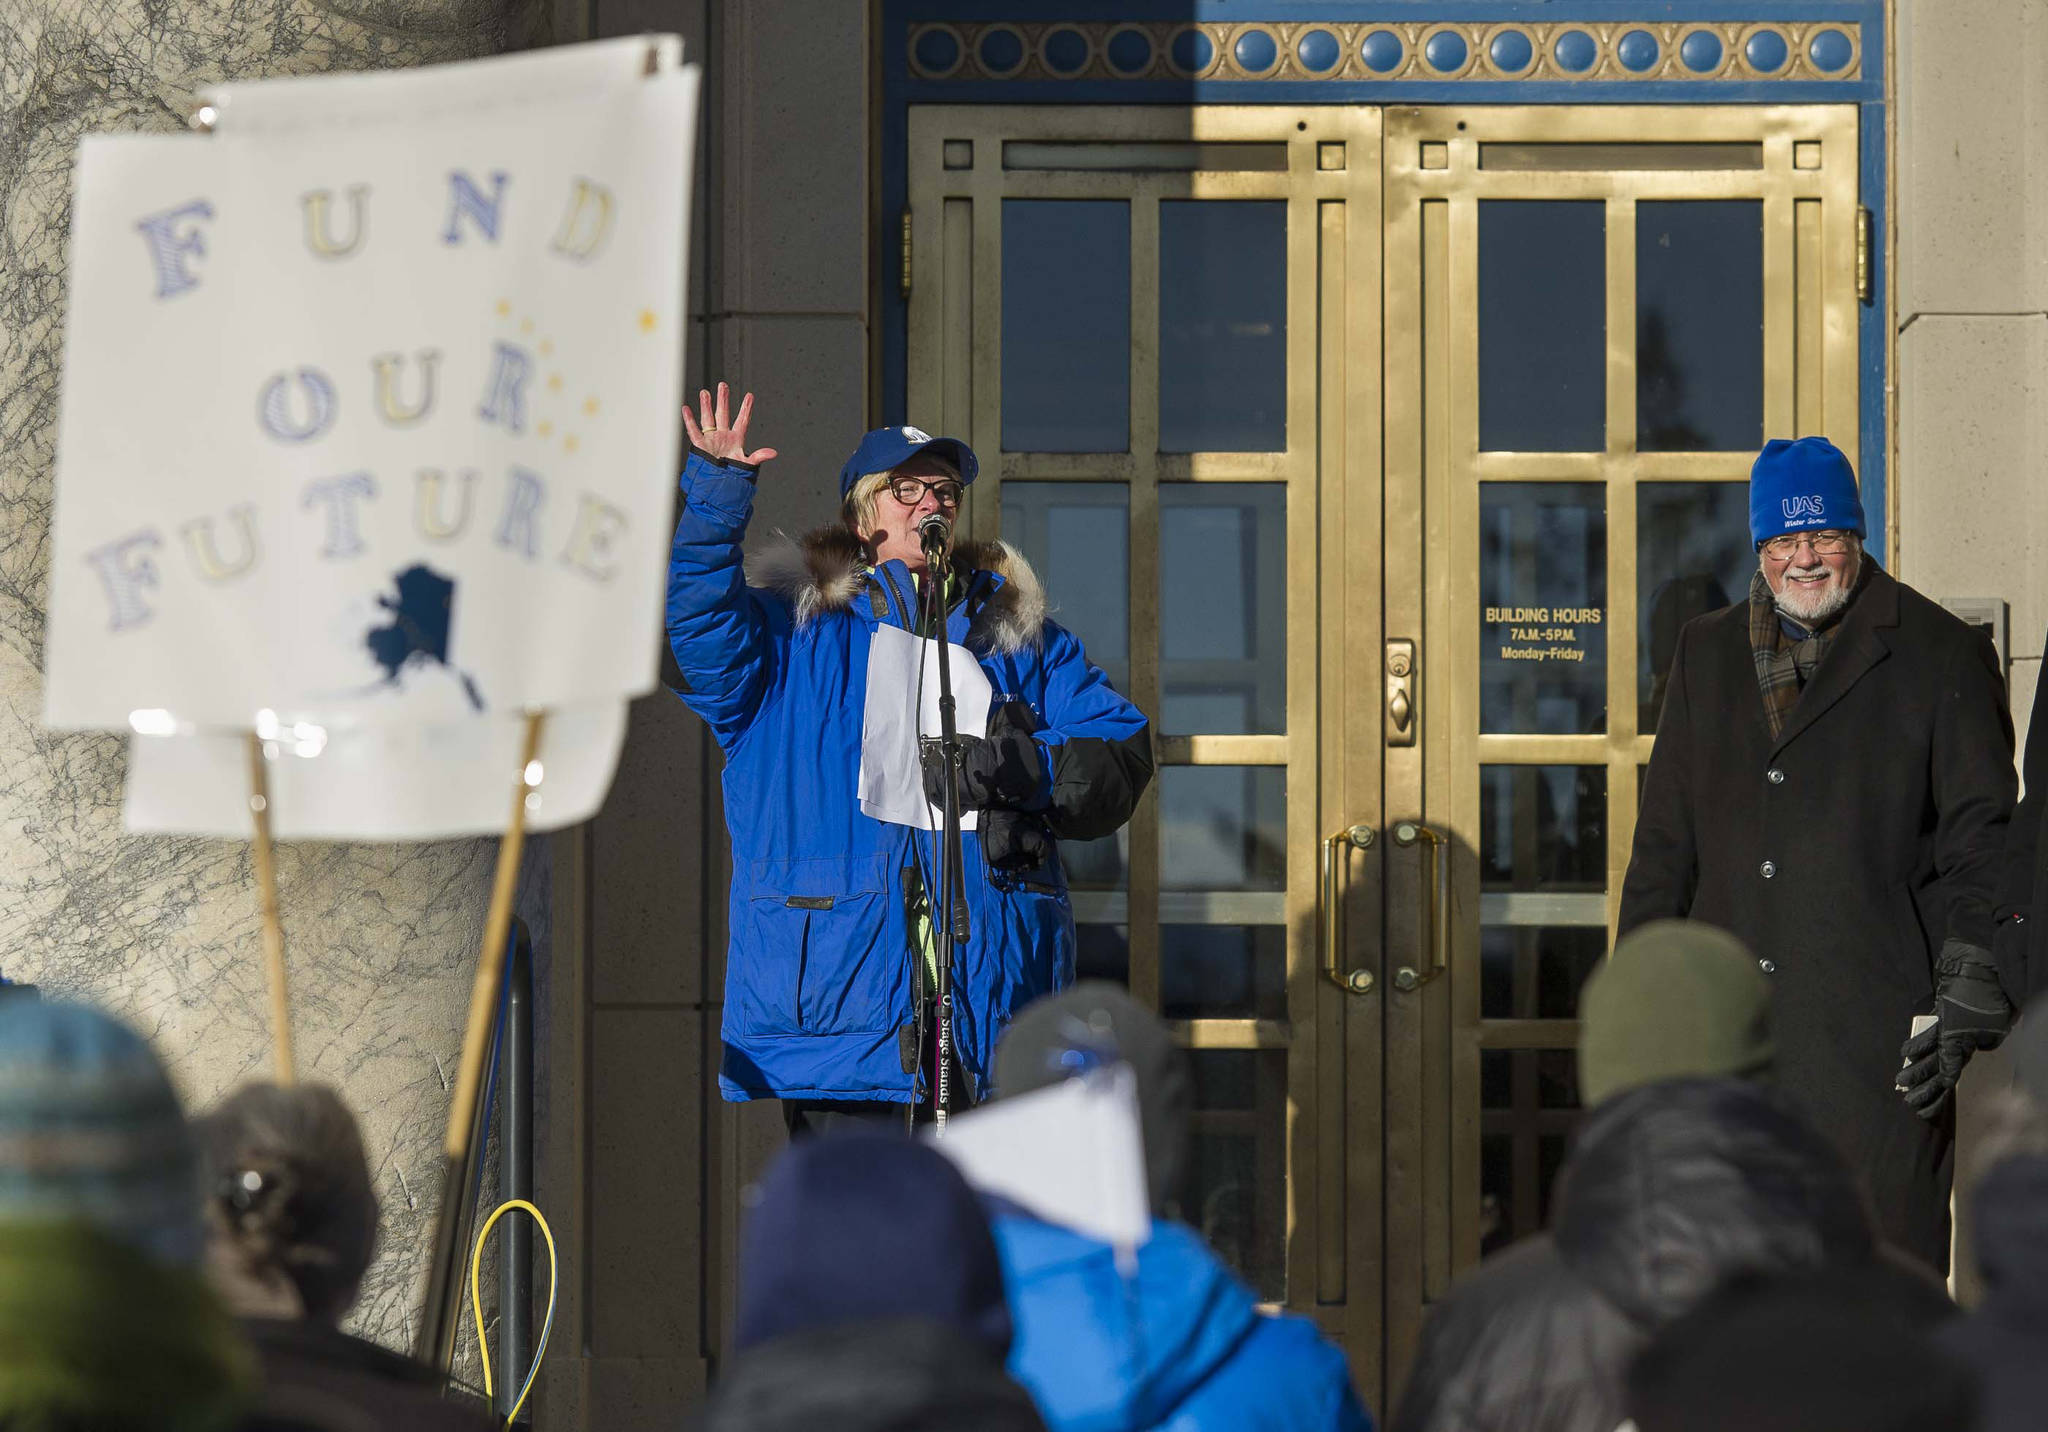 Former Rep. Beth Kerttula, left, introduces former University of Alaska Southeast Chancellor John Pugh during a rally in support of state funding for the University of Alaska in front of the Capitol on Friday, Feb. 2, 2018. University of Alaska Southeast Faculty Senate and Student Government hosted the event. (Michael Penn | Juneau Empire)